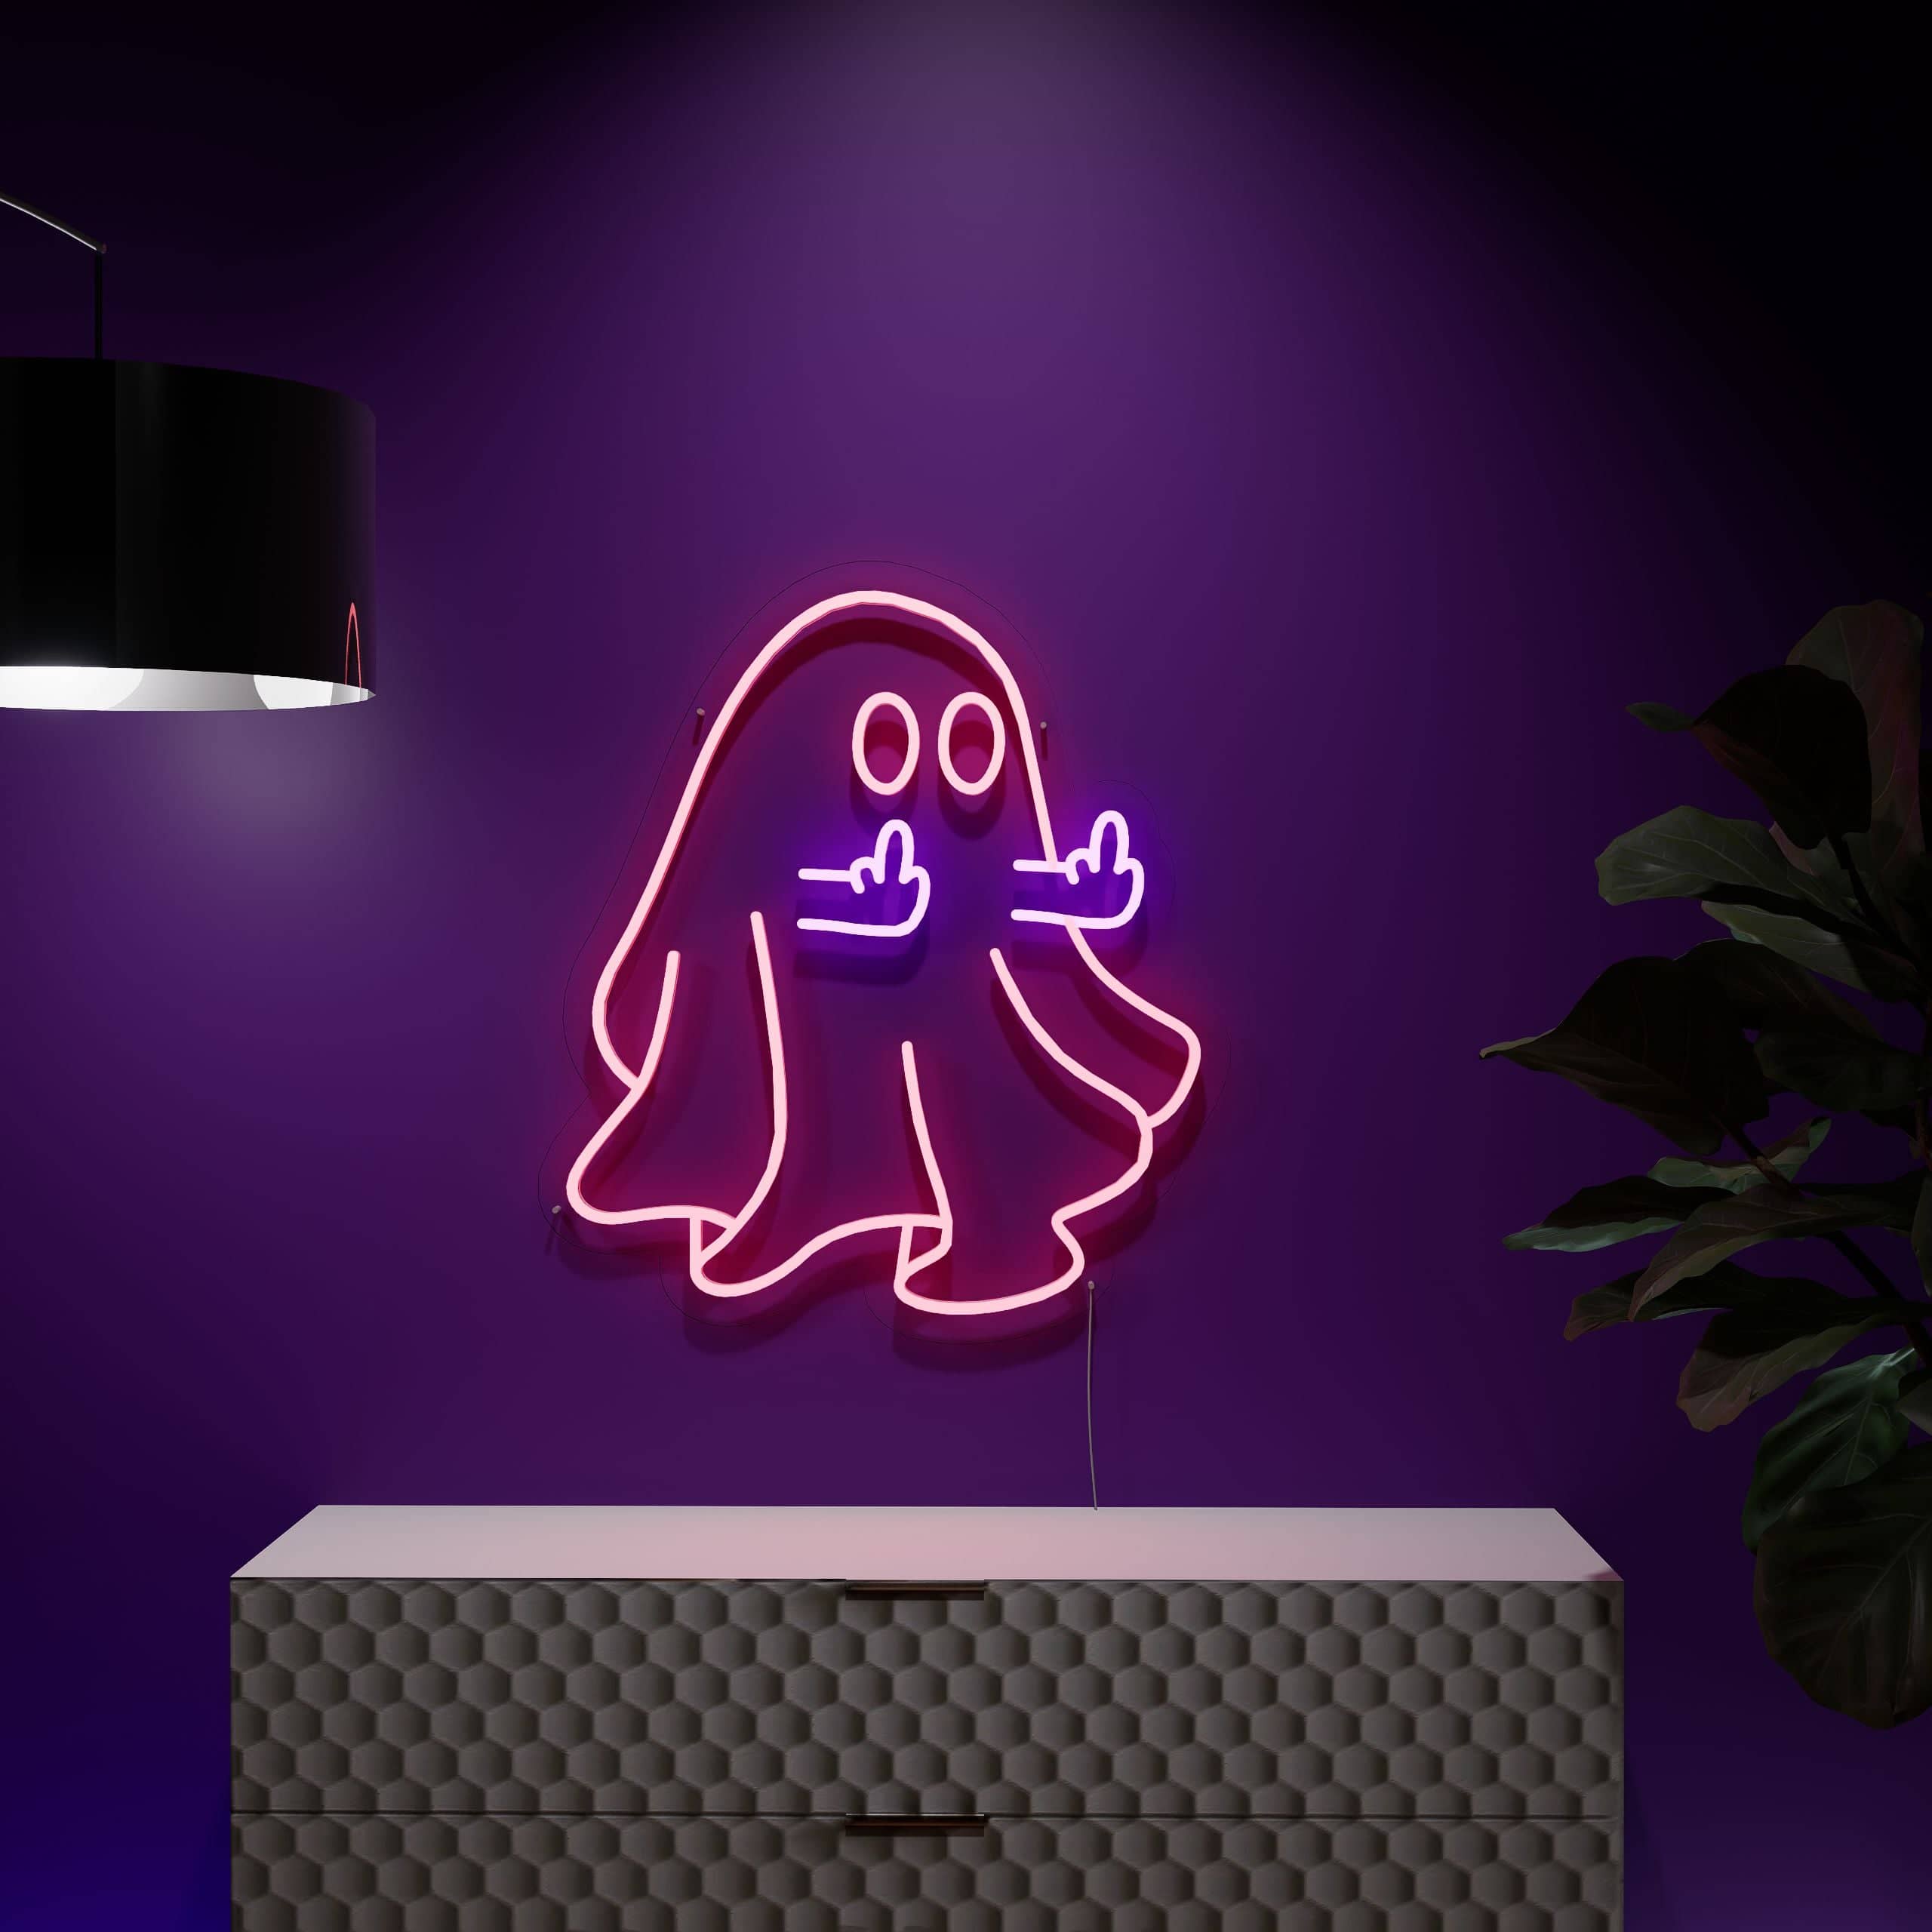 mocking-laughter-of-the-ghost-neon-sign-lite